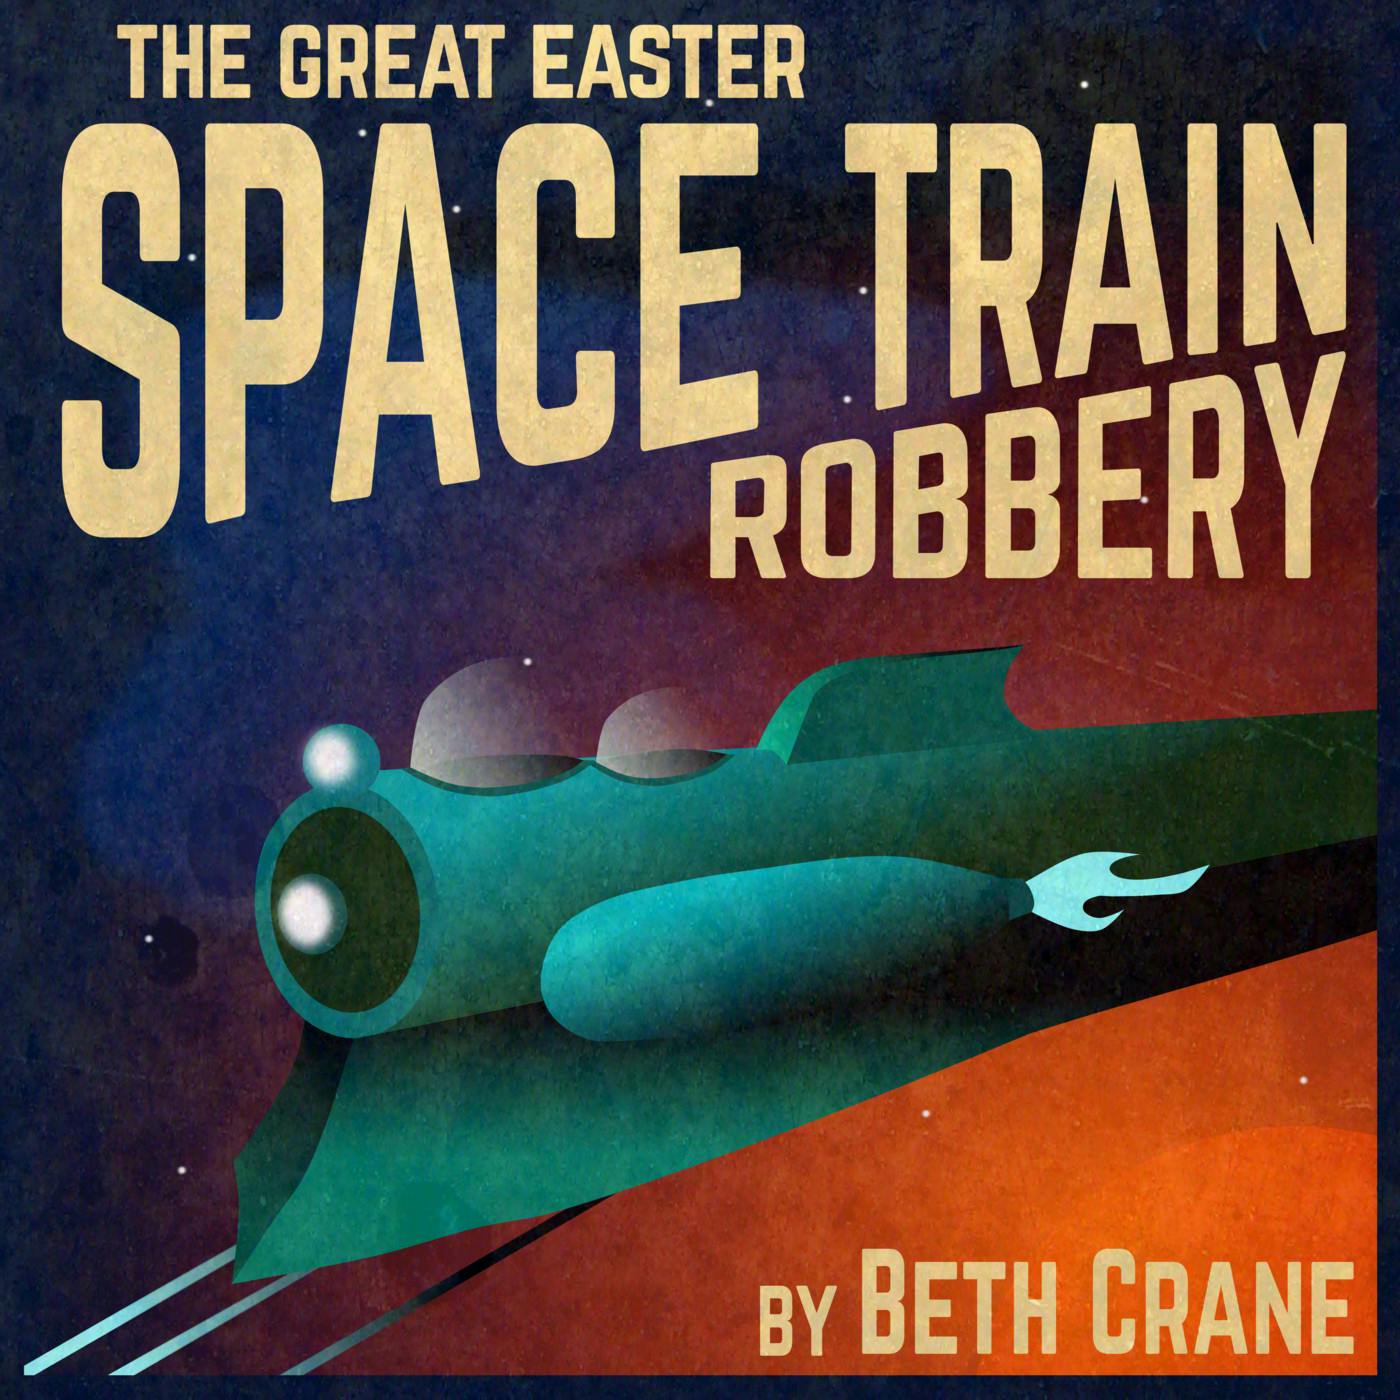 [Trailer] The Great Easter Space Train Robbery